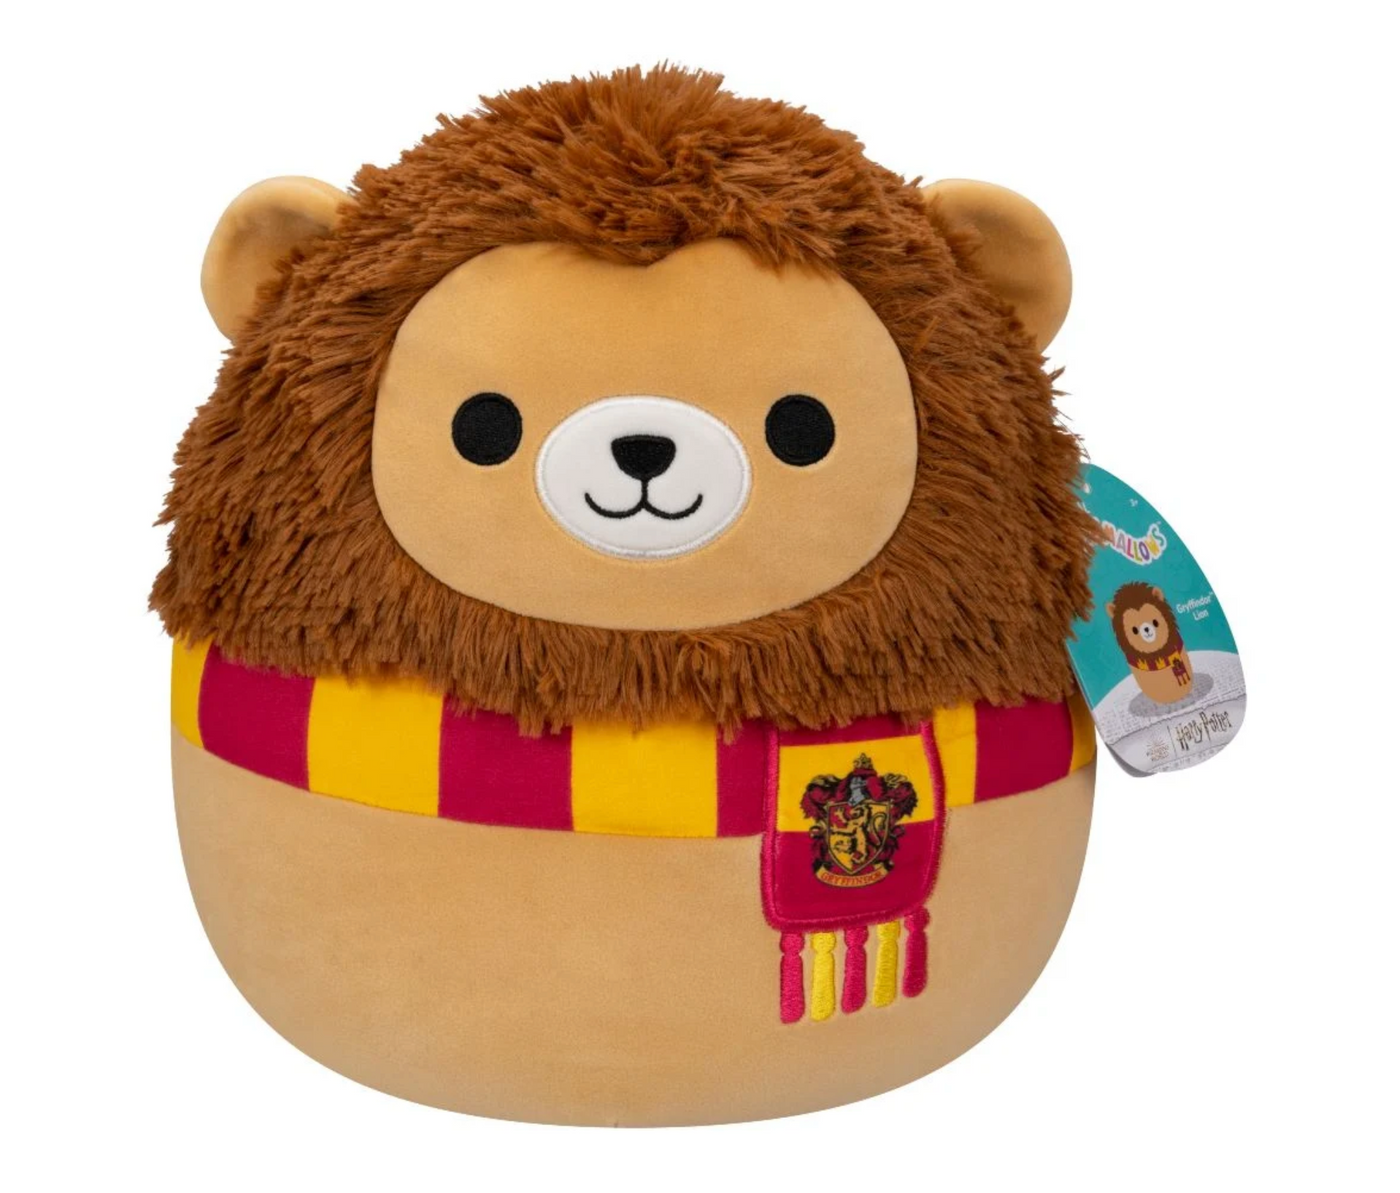 Squishmallows Original Harry Potter Gryffindor House Lion Plush New with Tag